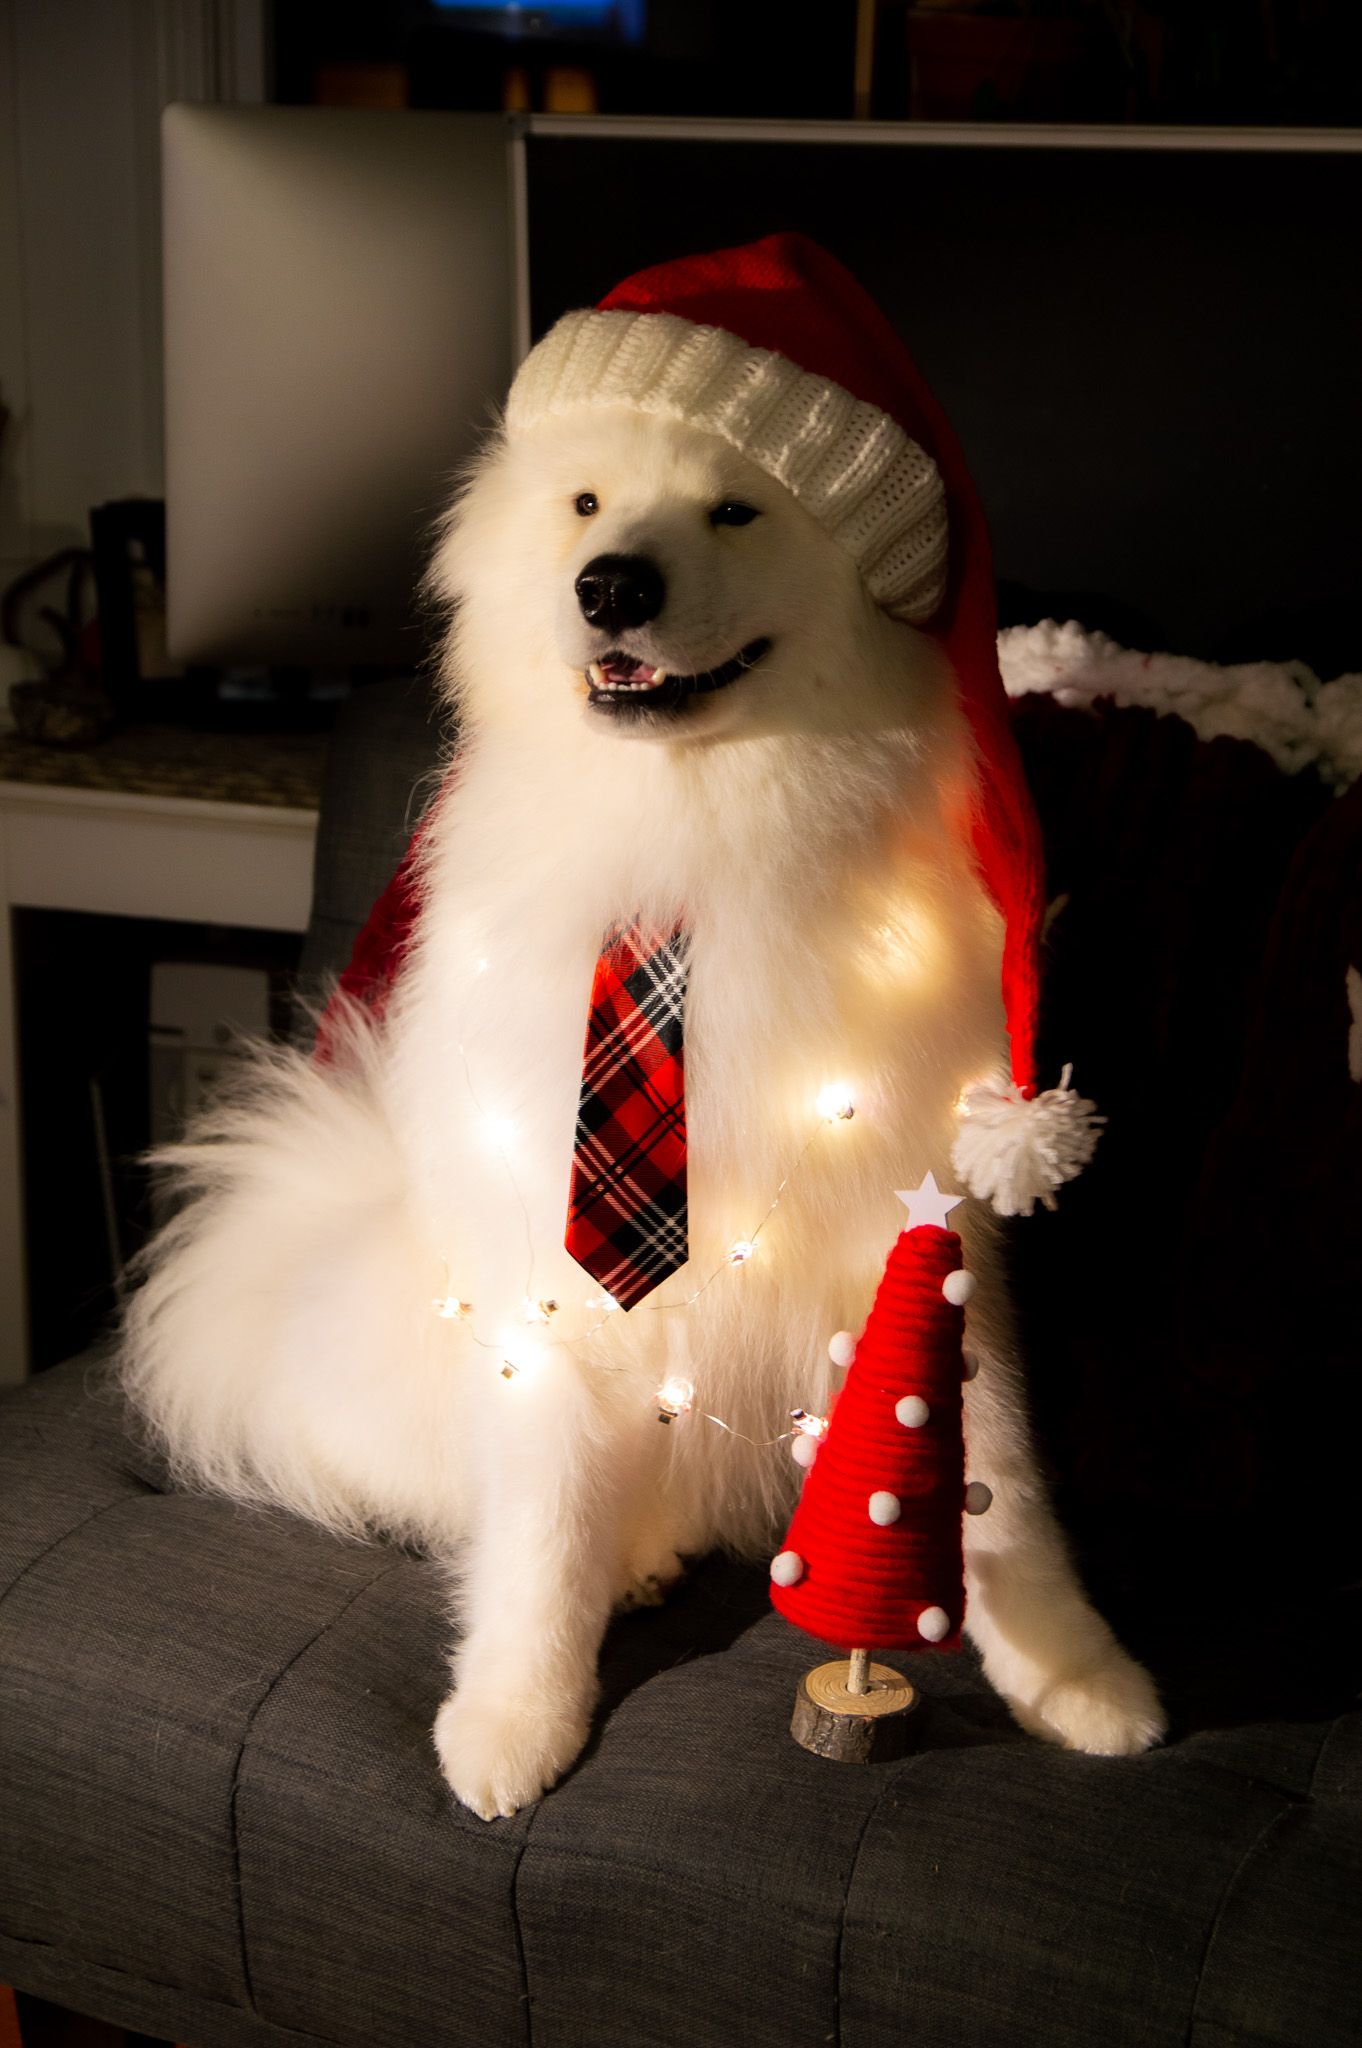 hodu, a white fluffy dog, in a santa hat with a tie